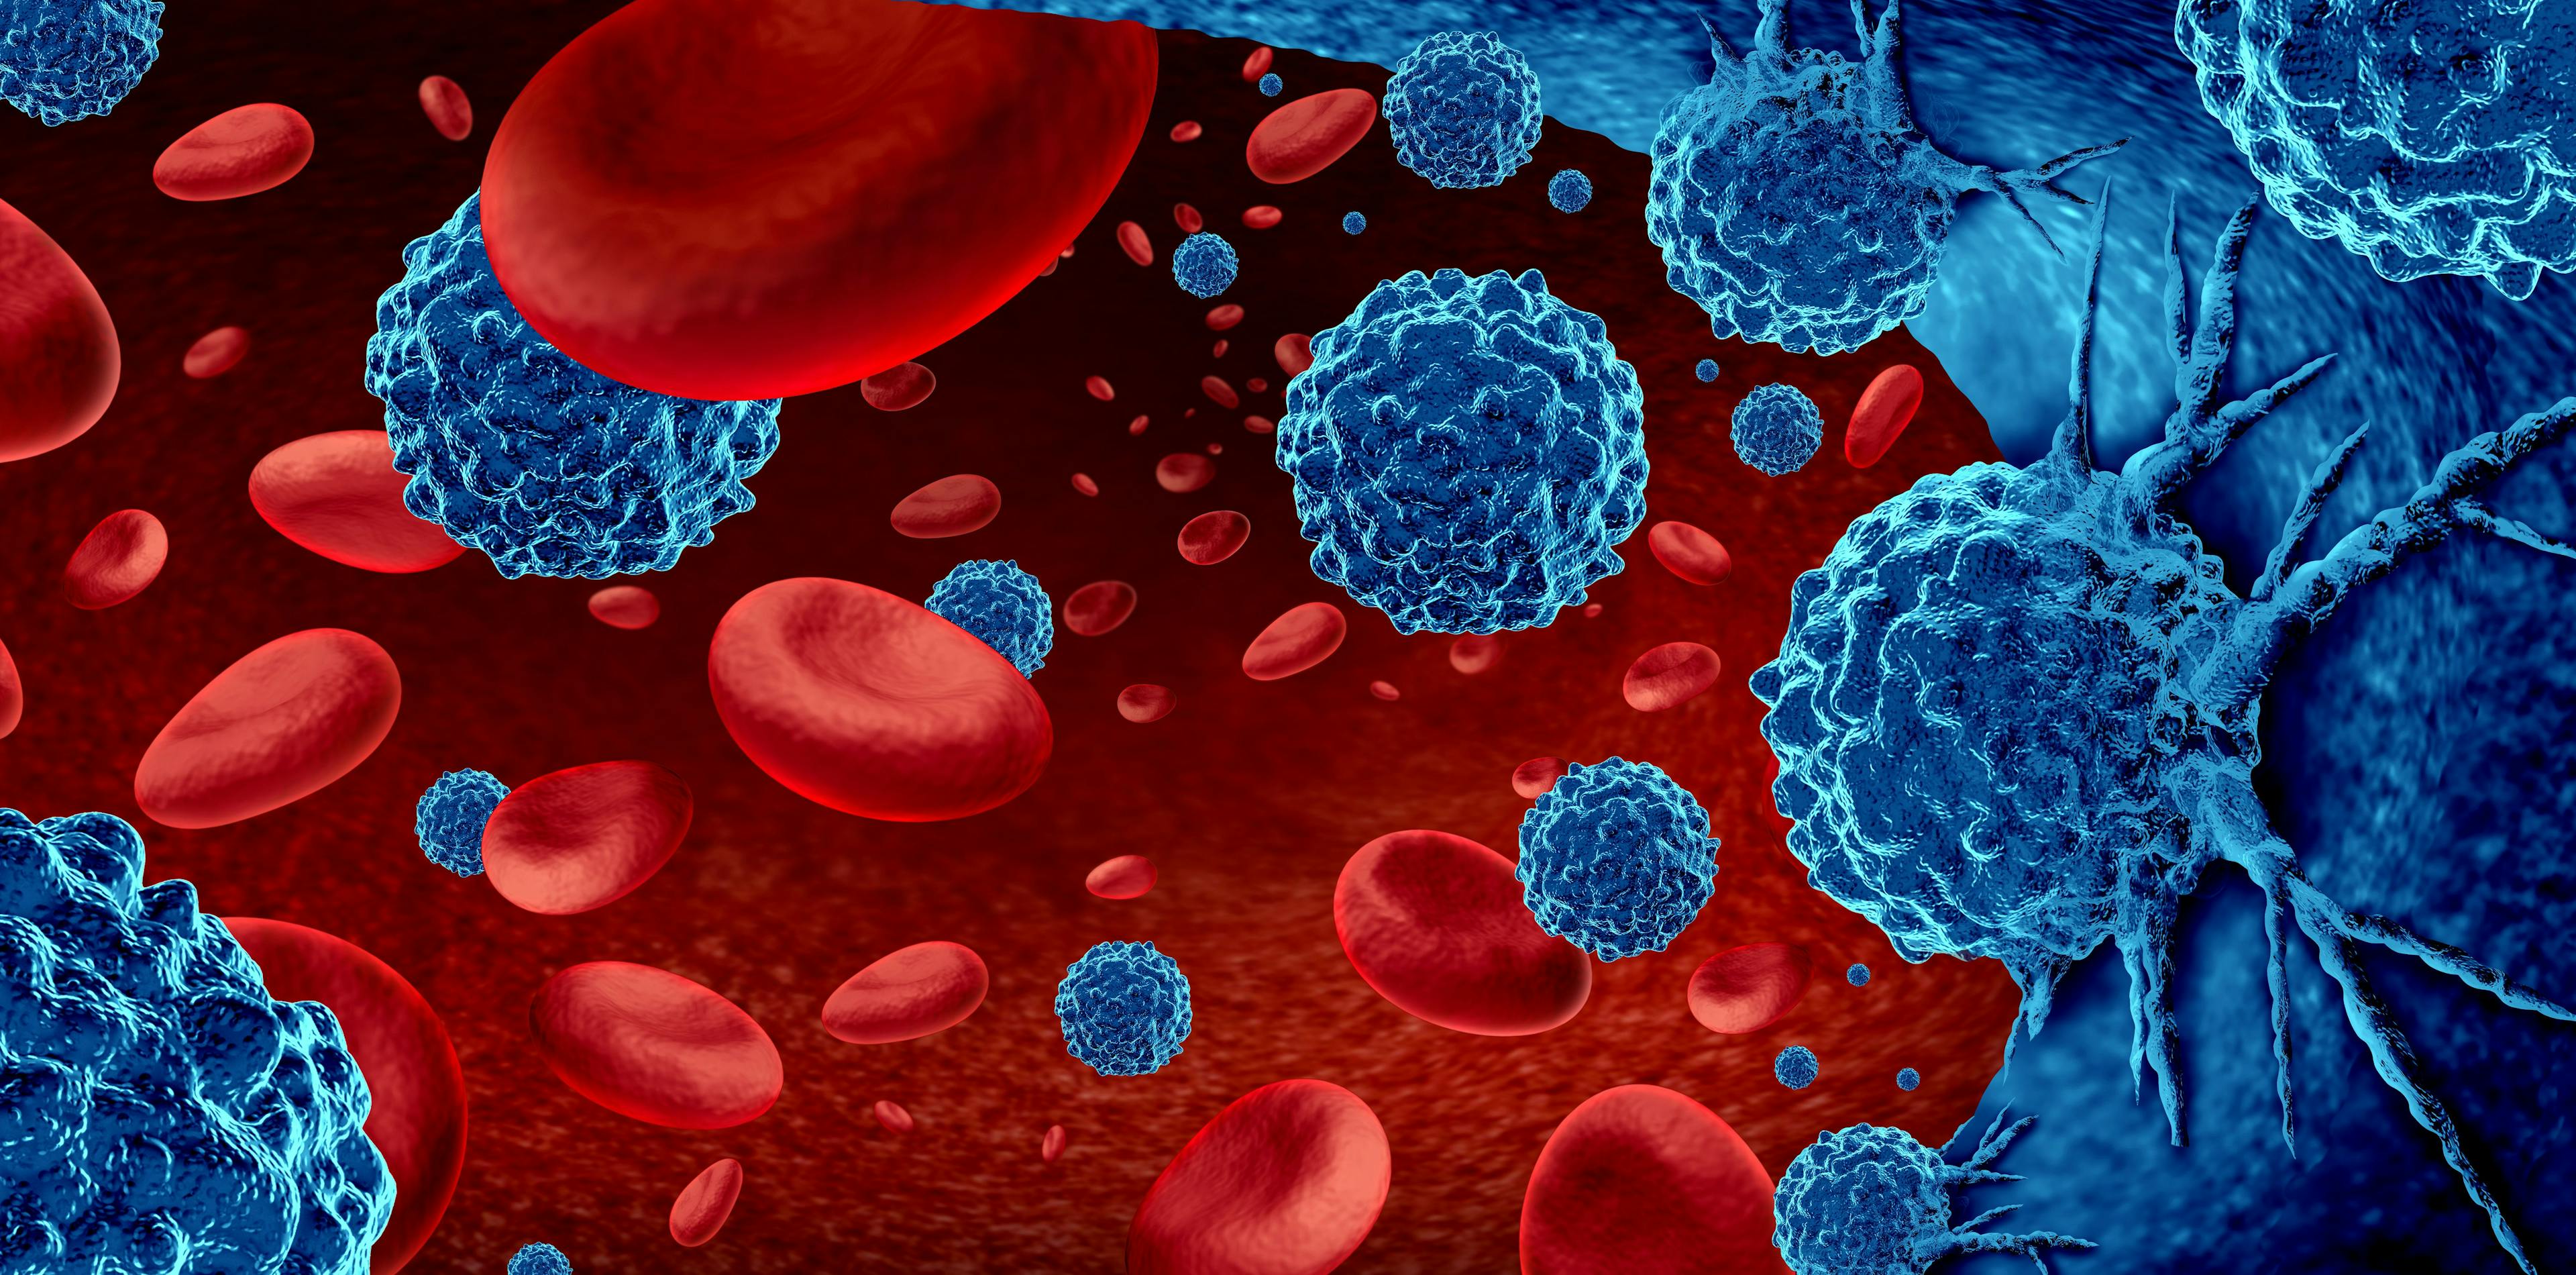 Allogeneic CAR T-Cell Therapy Shows Promise in R/R B-Cell Acute Lymphoblastic Leukemia 